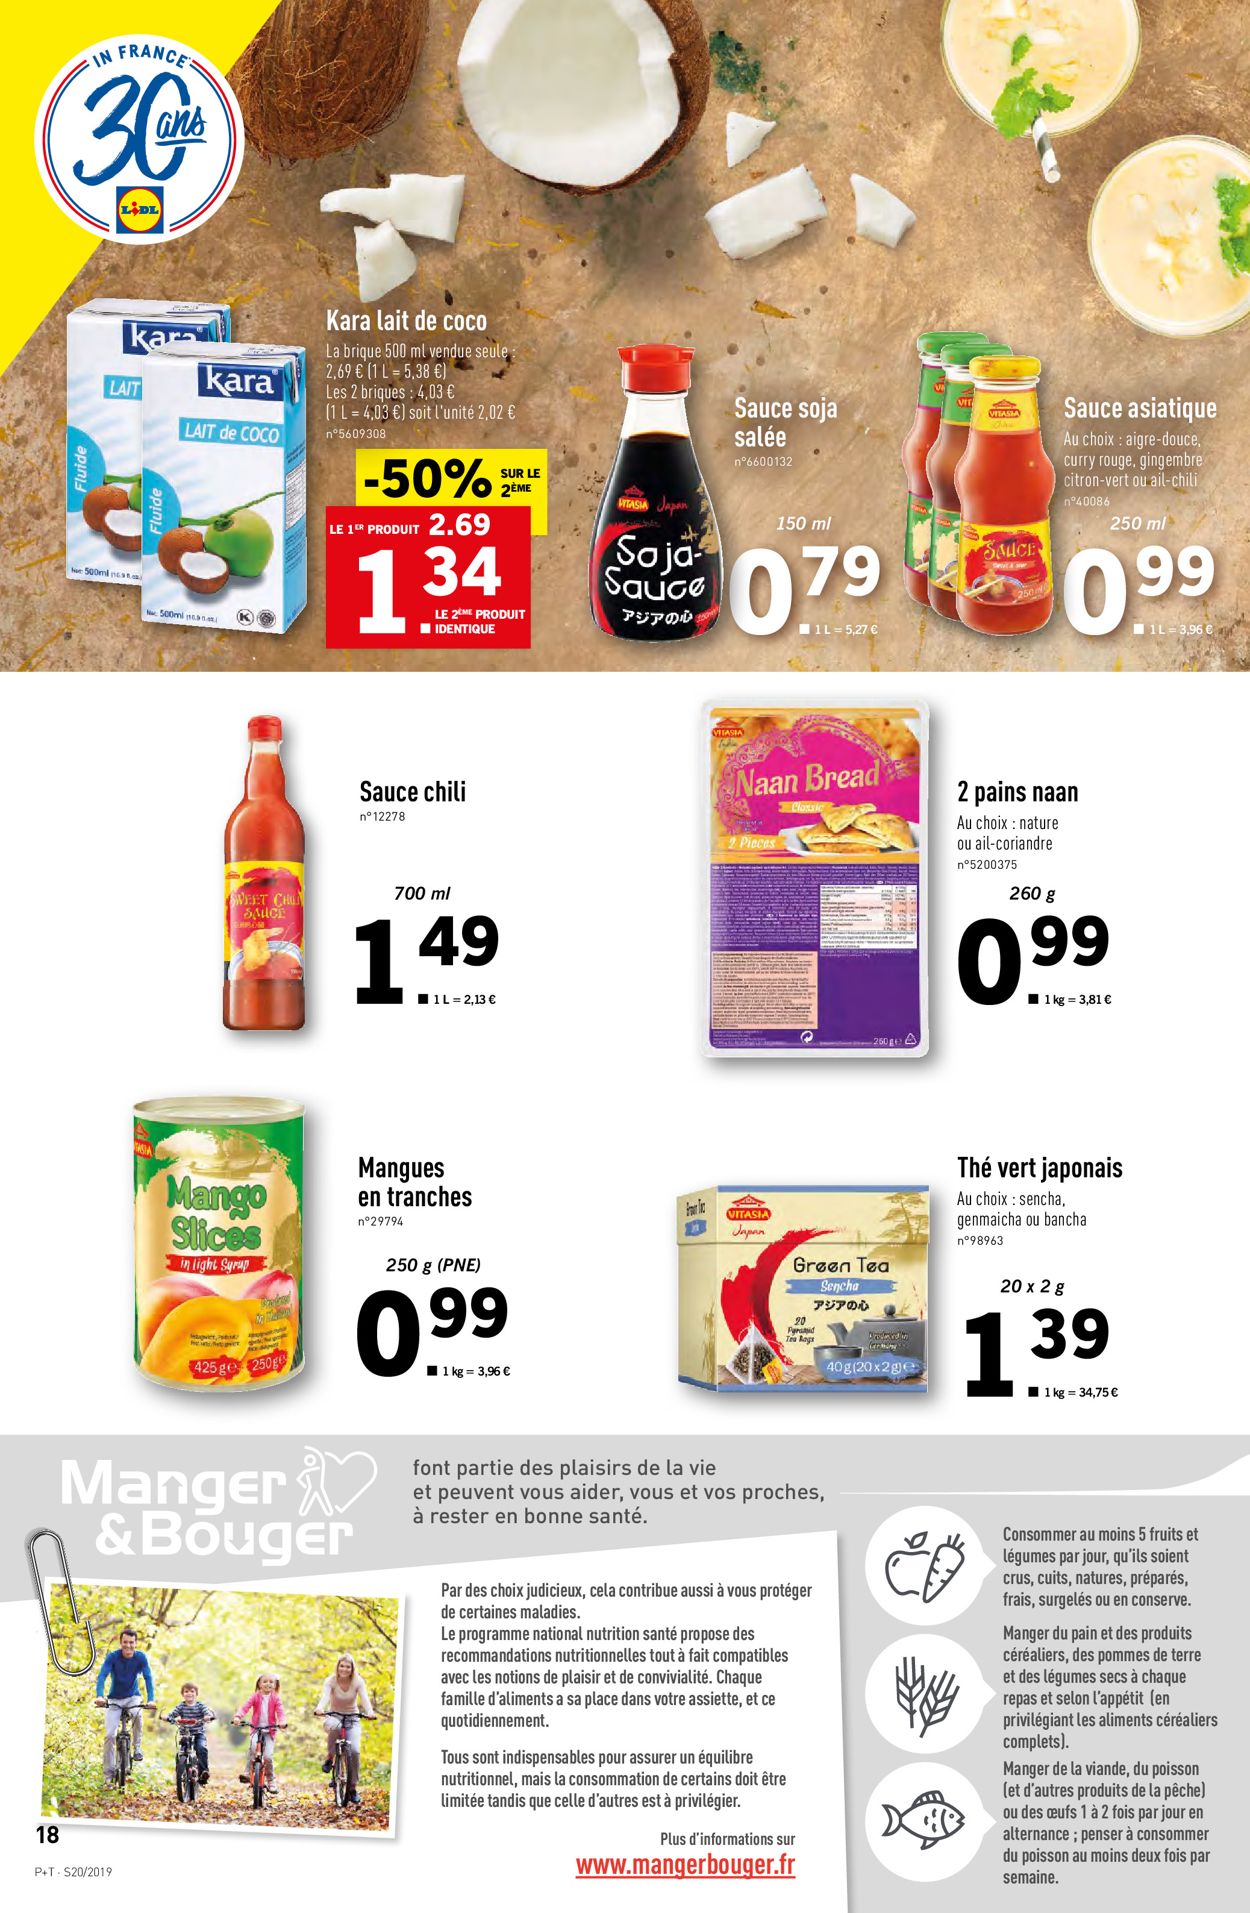 Lidl Catalogue - 15.05-21.05.2019 (Page 18)